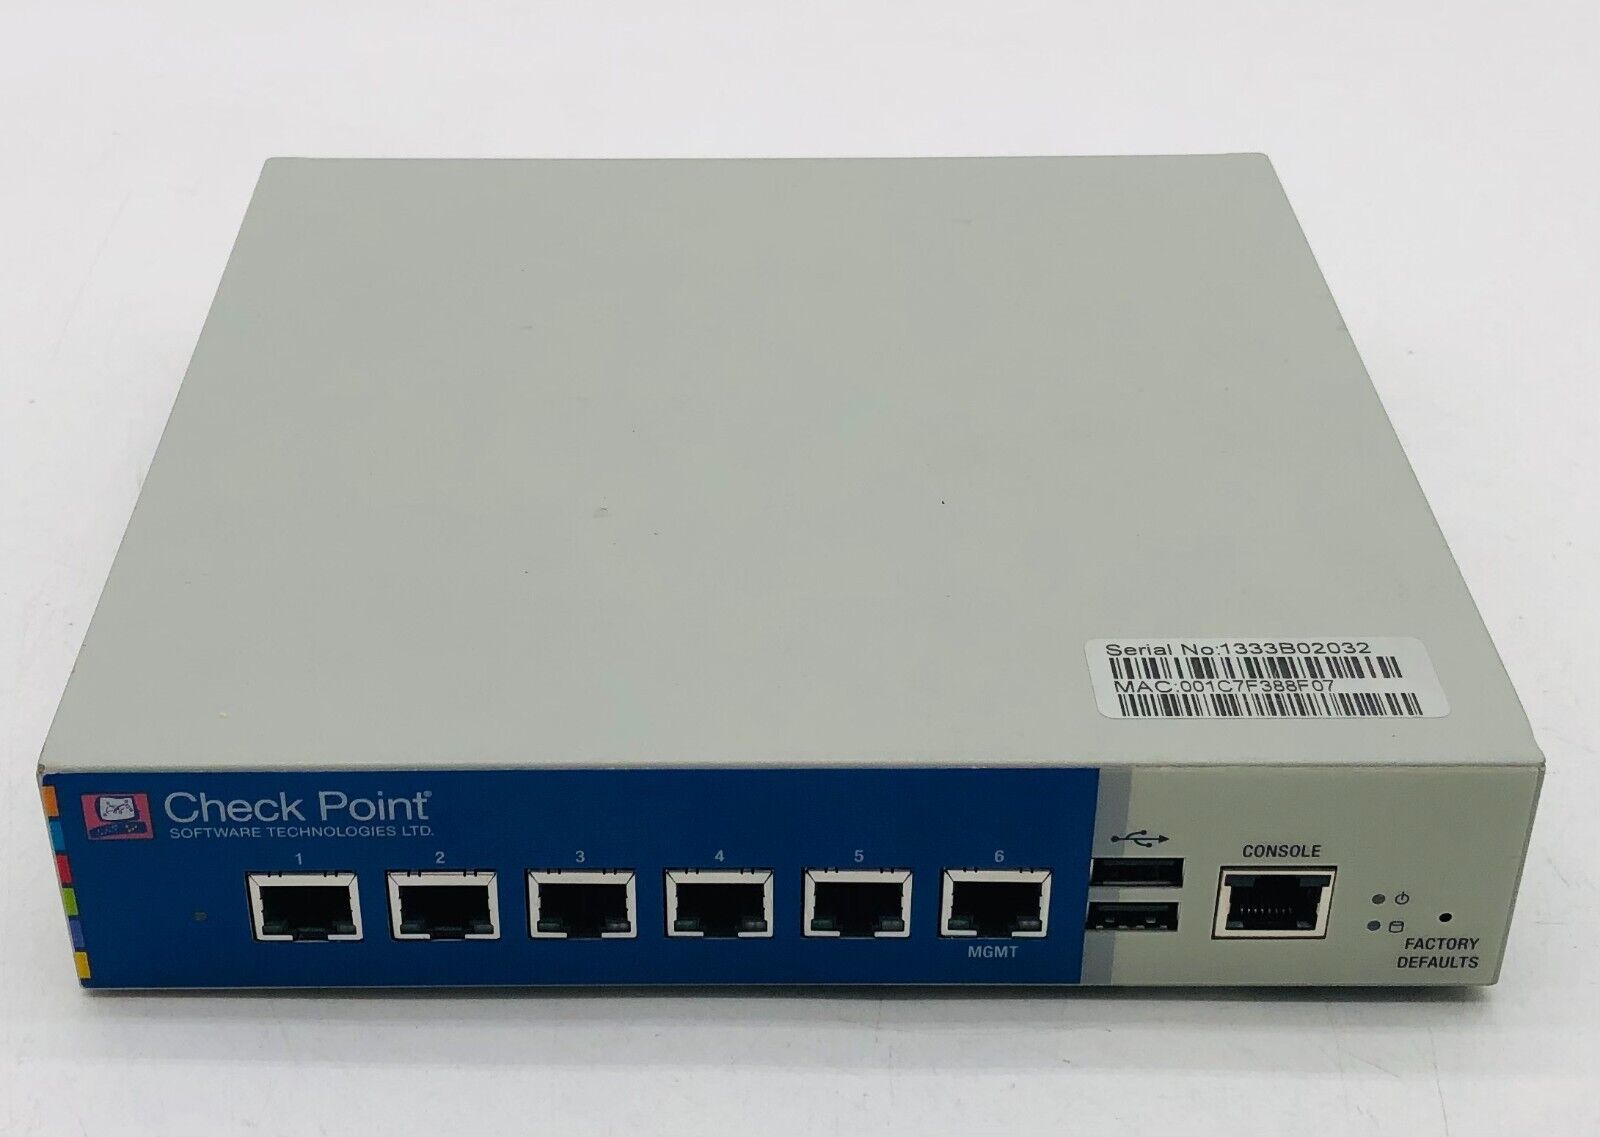 CHECK POINT T-110 6-PORT GIGABIT SECURITY ROUTER